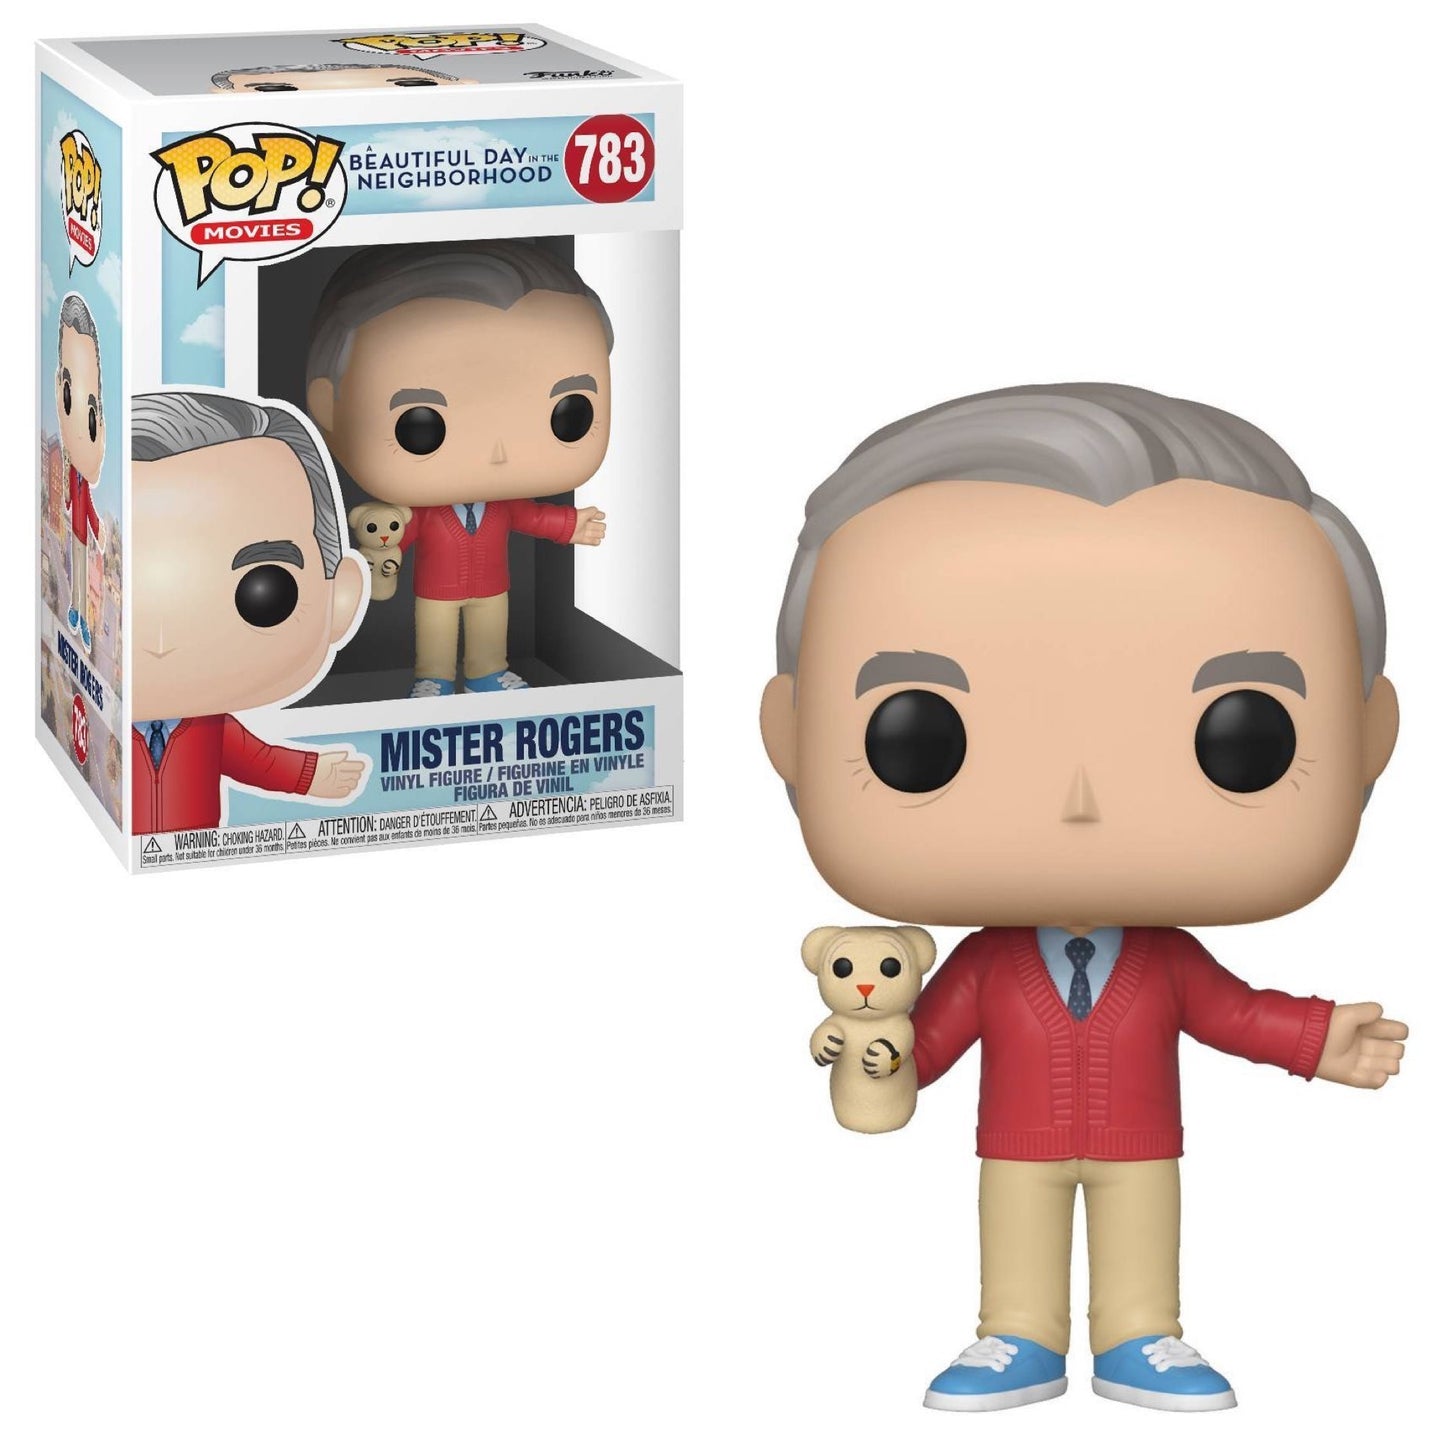 Funko Pop! Movies: A Beautiful Day in the Neighborhood: Mister Rogers